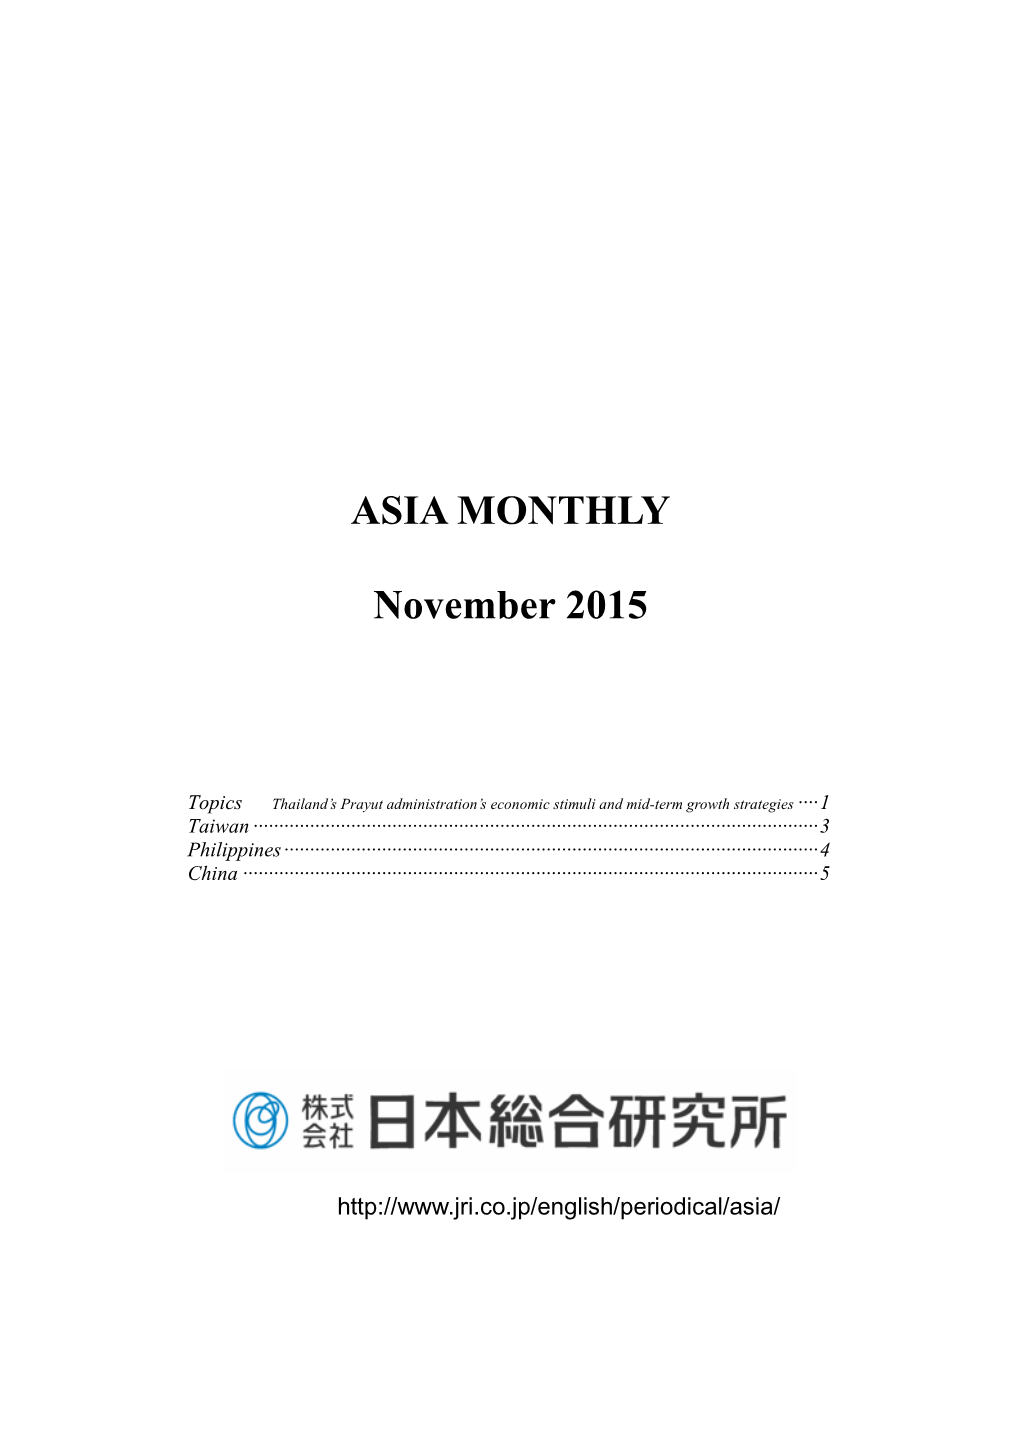 ASIA MONTHLY REPORT November 2015, No.176